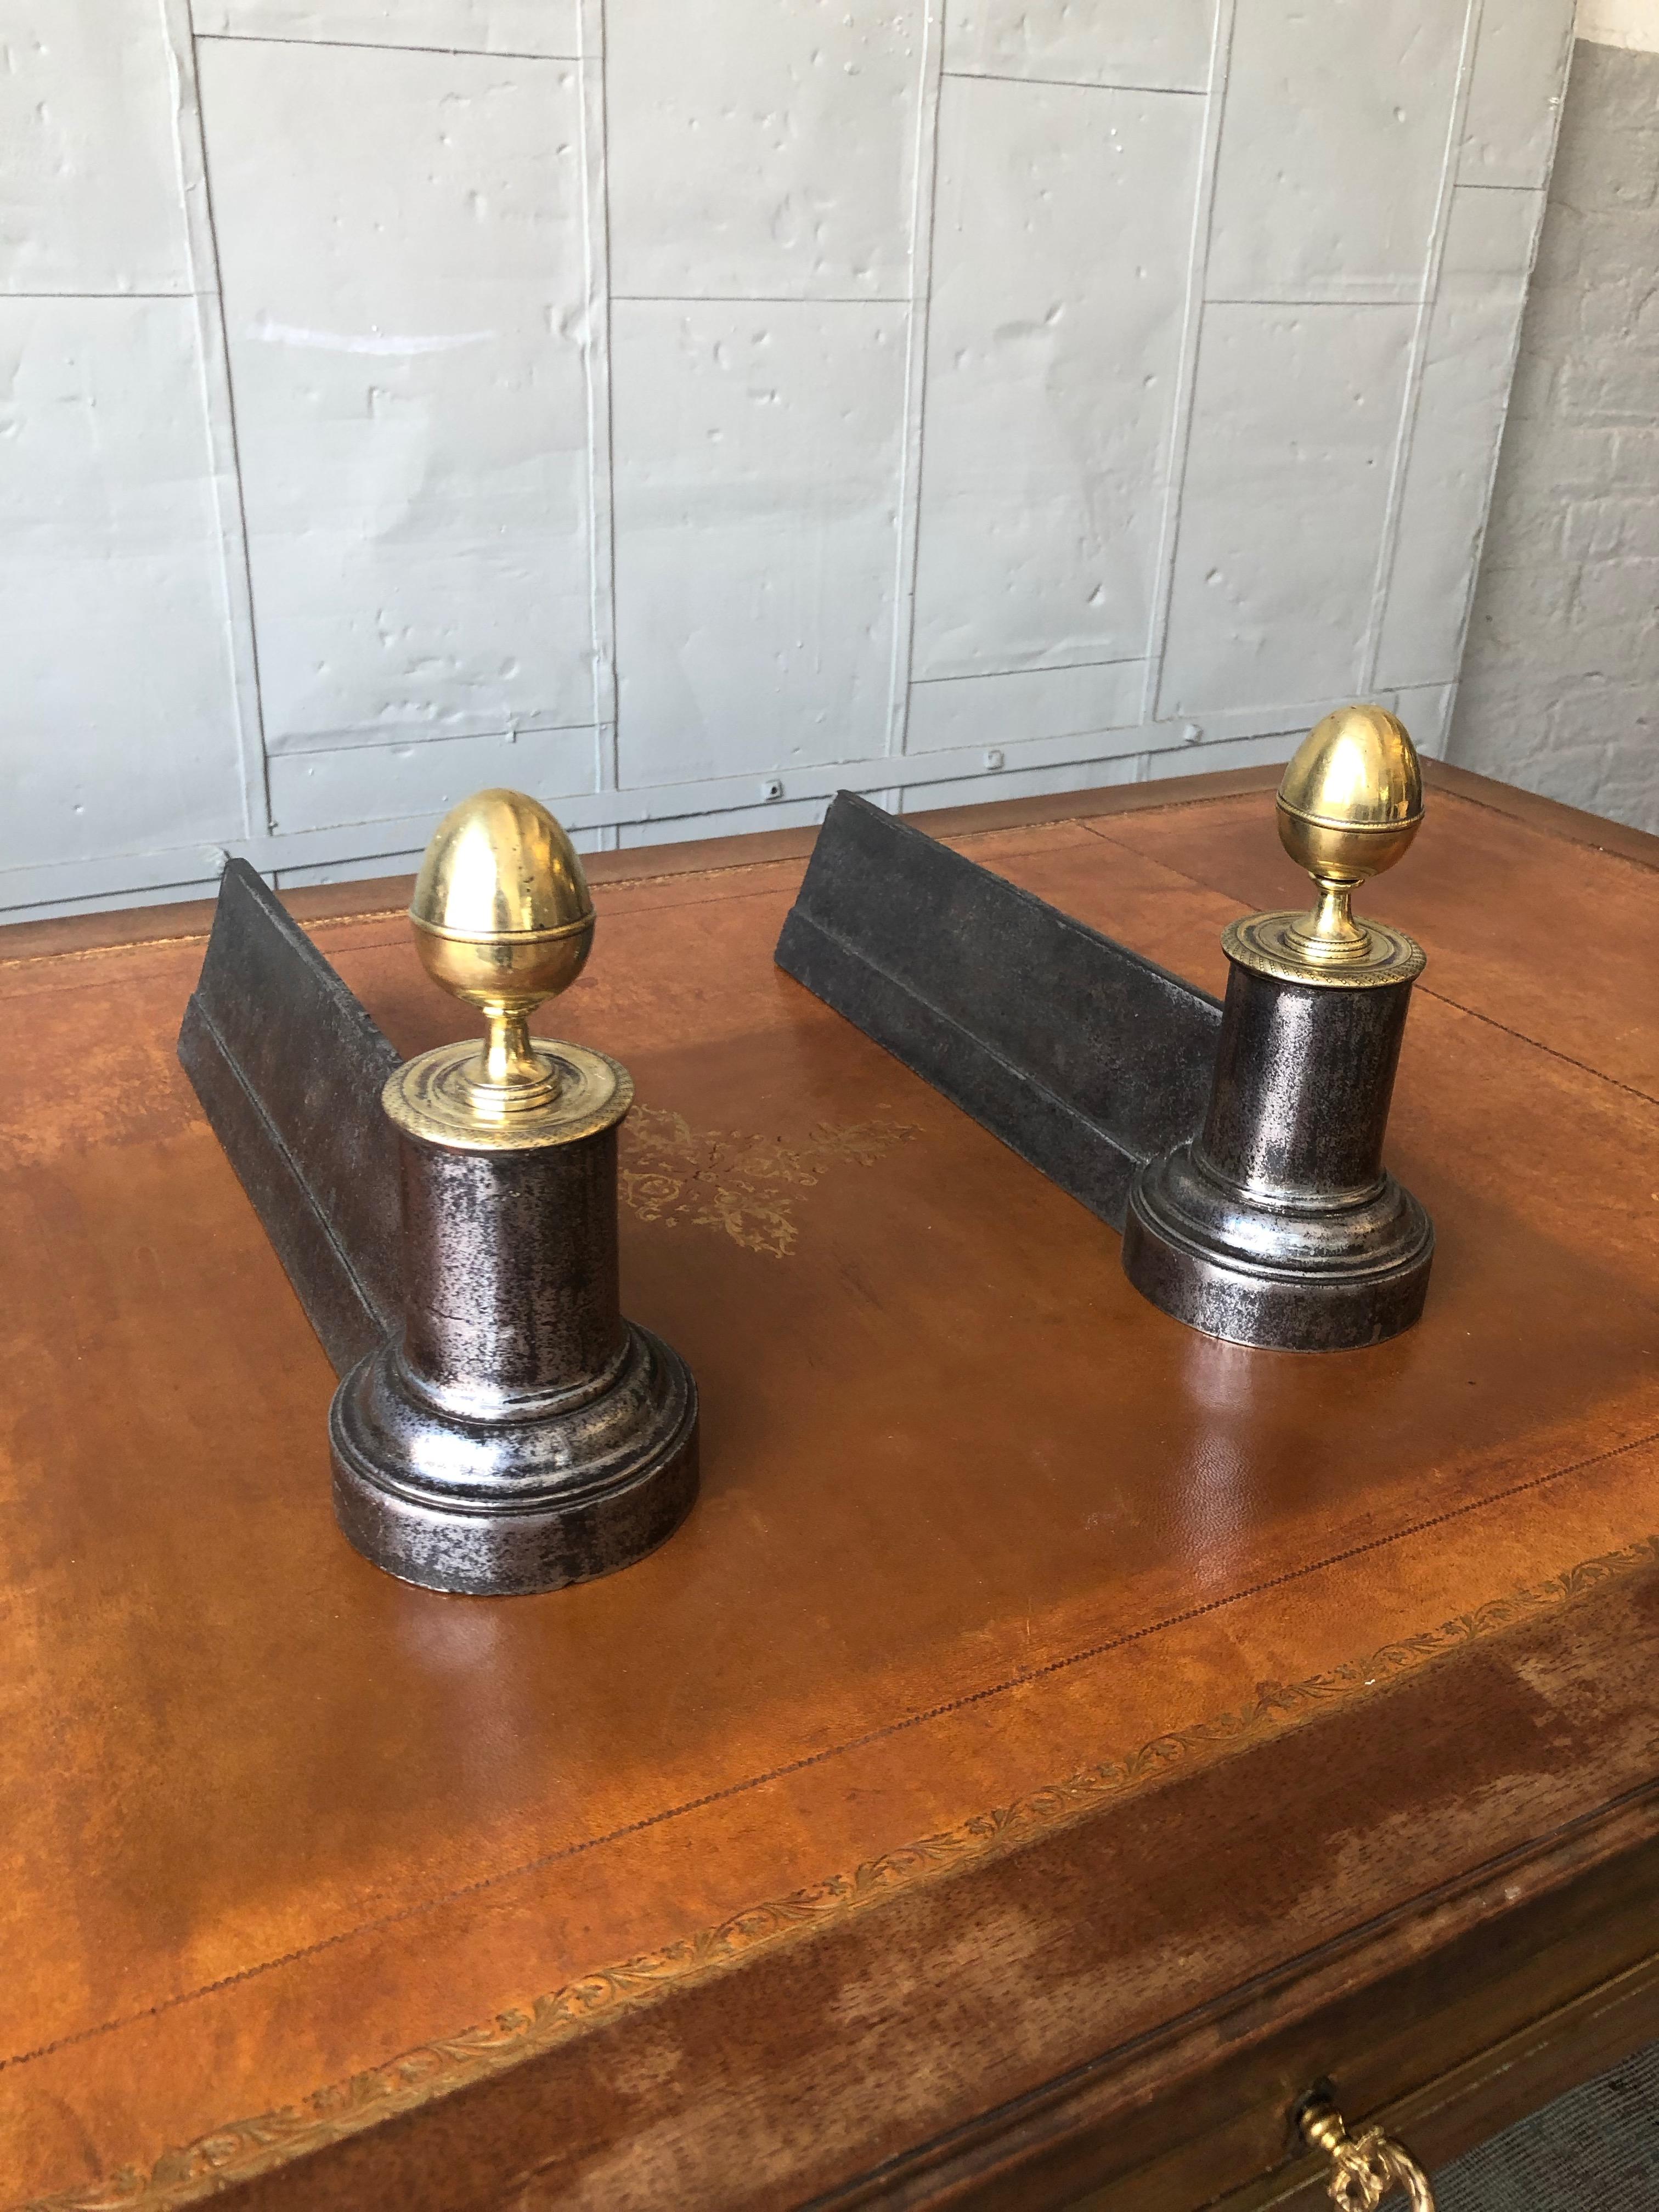 A pair of 19th century French fire andirons in the Empire style. The polished iron supports are complimented with oversized brass finials resting on classical columns. The andirons have recently been polished, and they are in very good